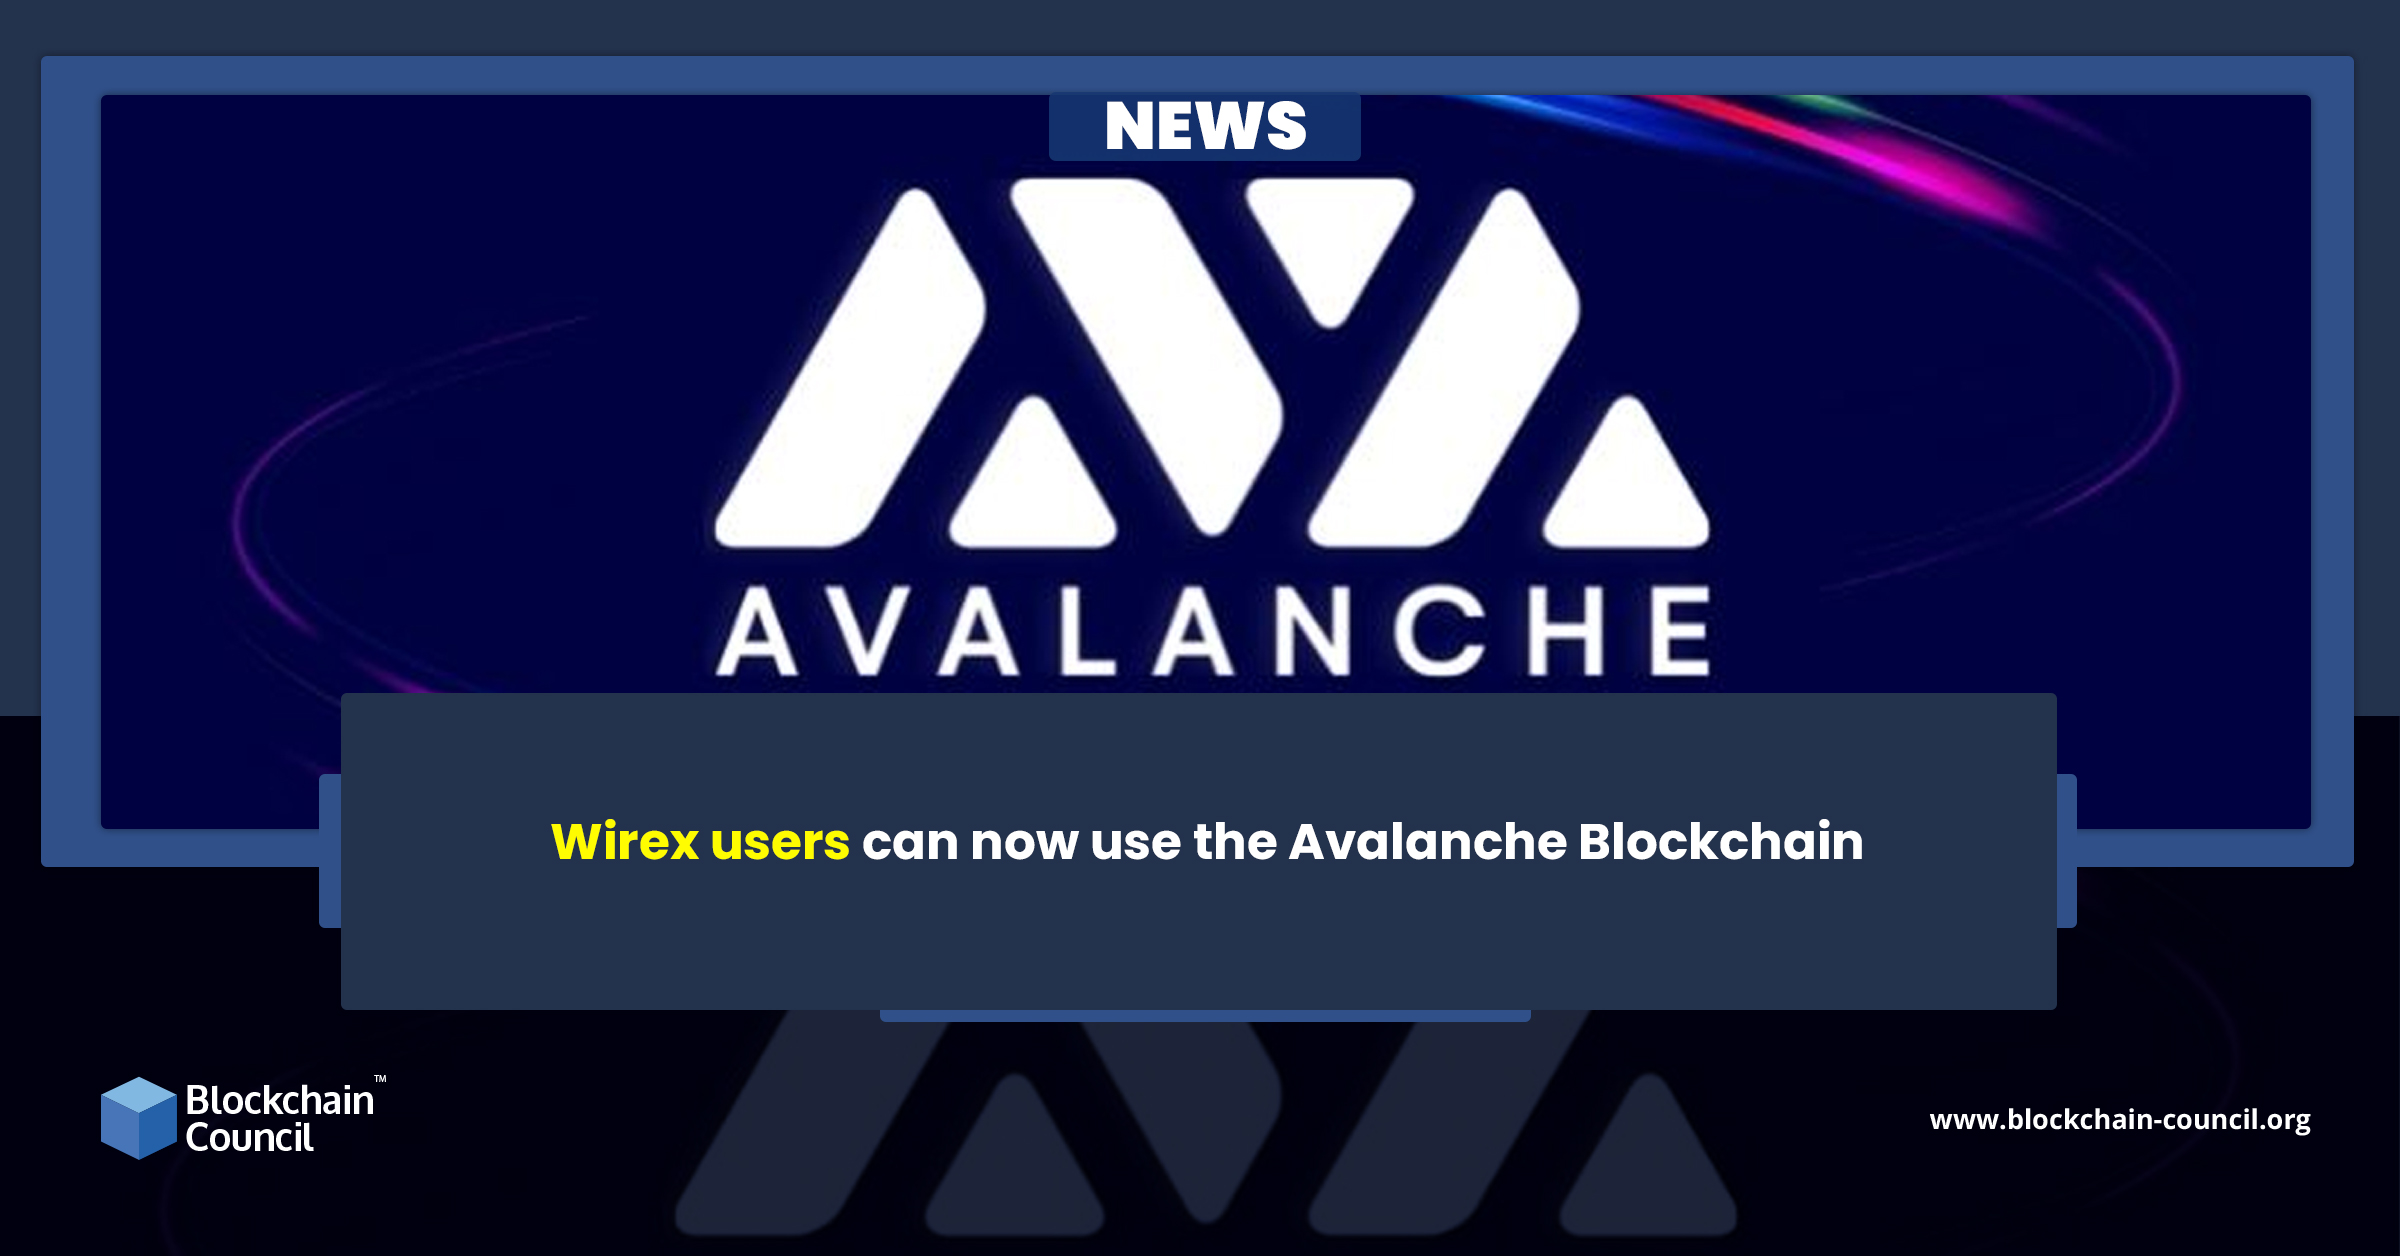 Wirex users can now use the Avalanche Blockchain